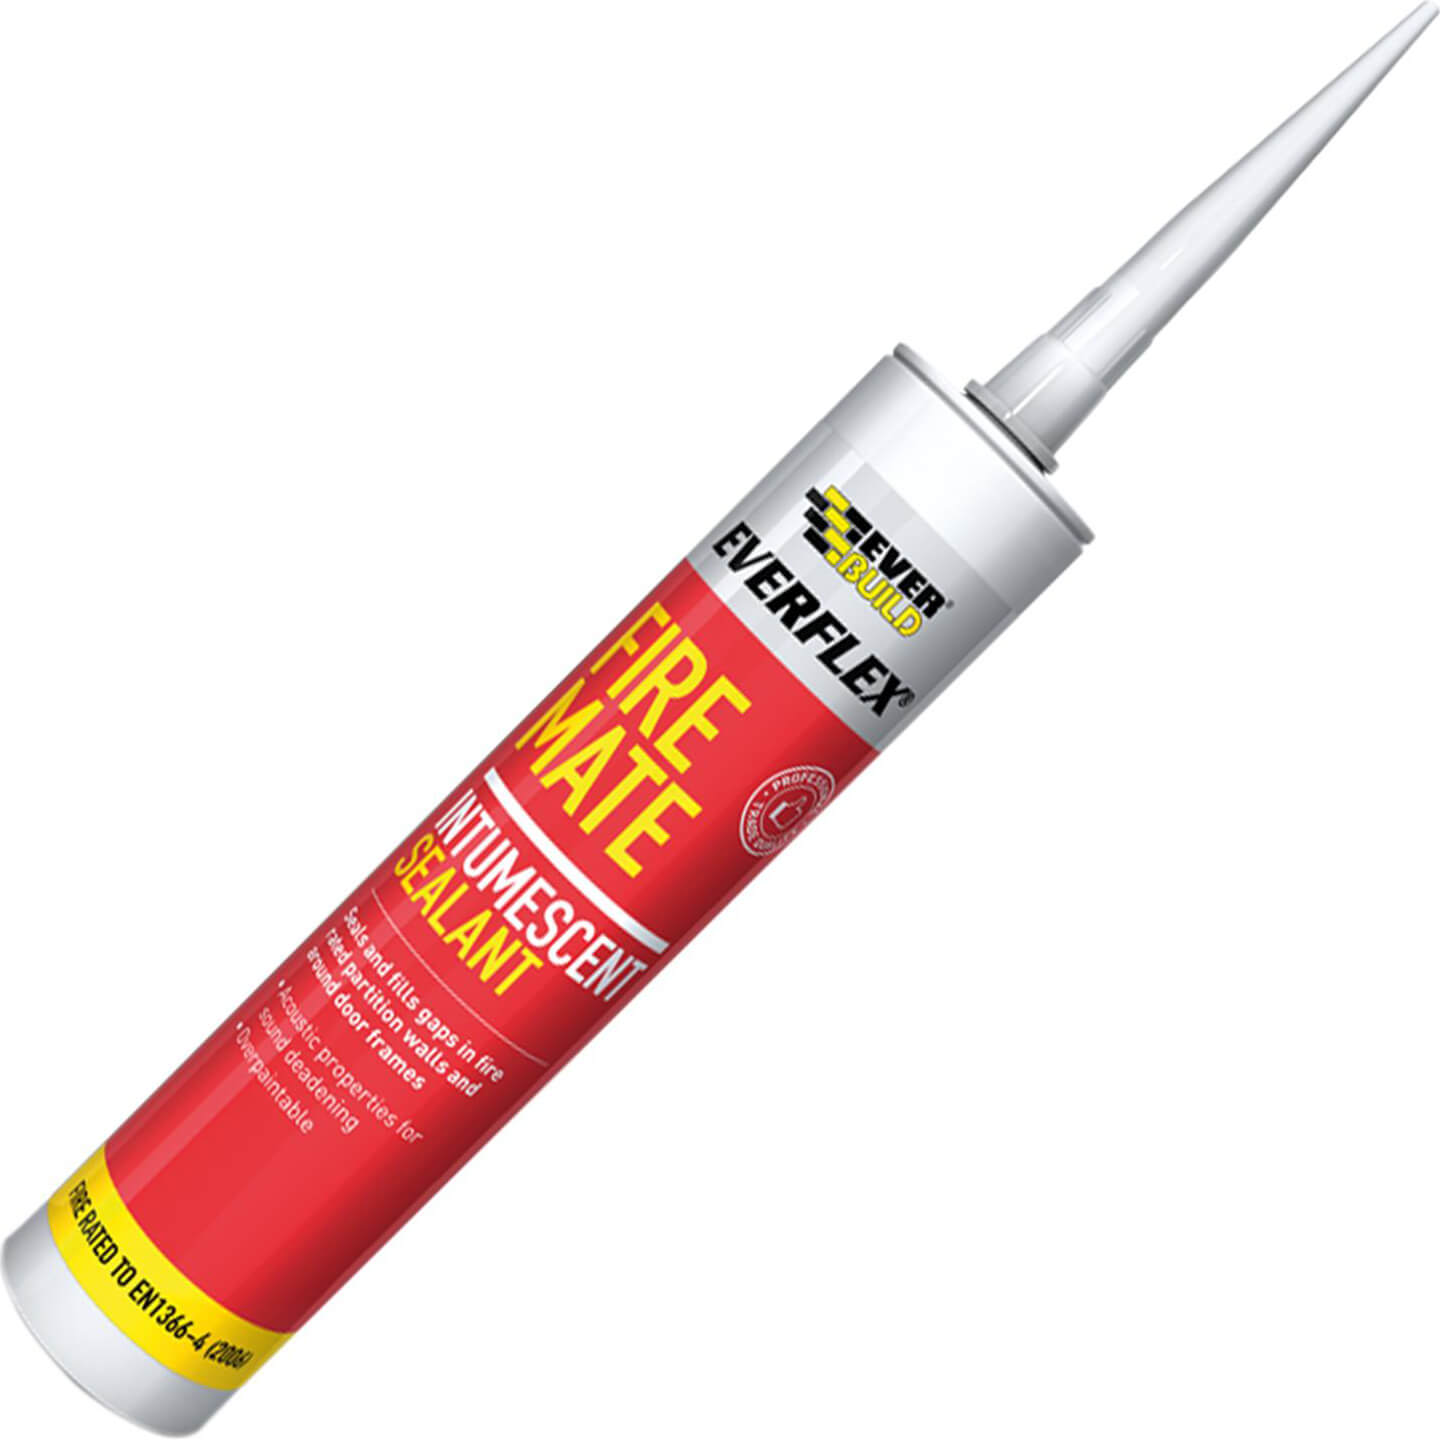 Image of Everbuild Fire Mate Intumescent Sealant Brown